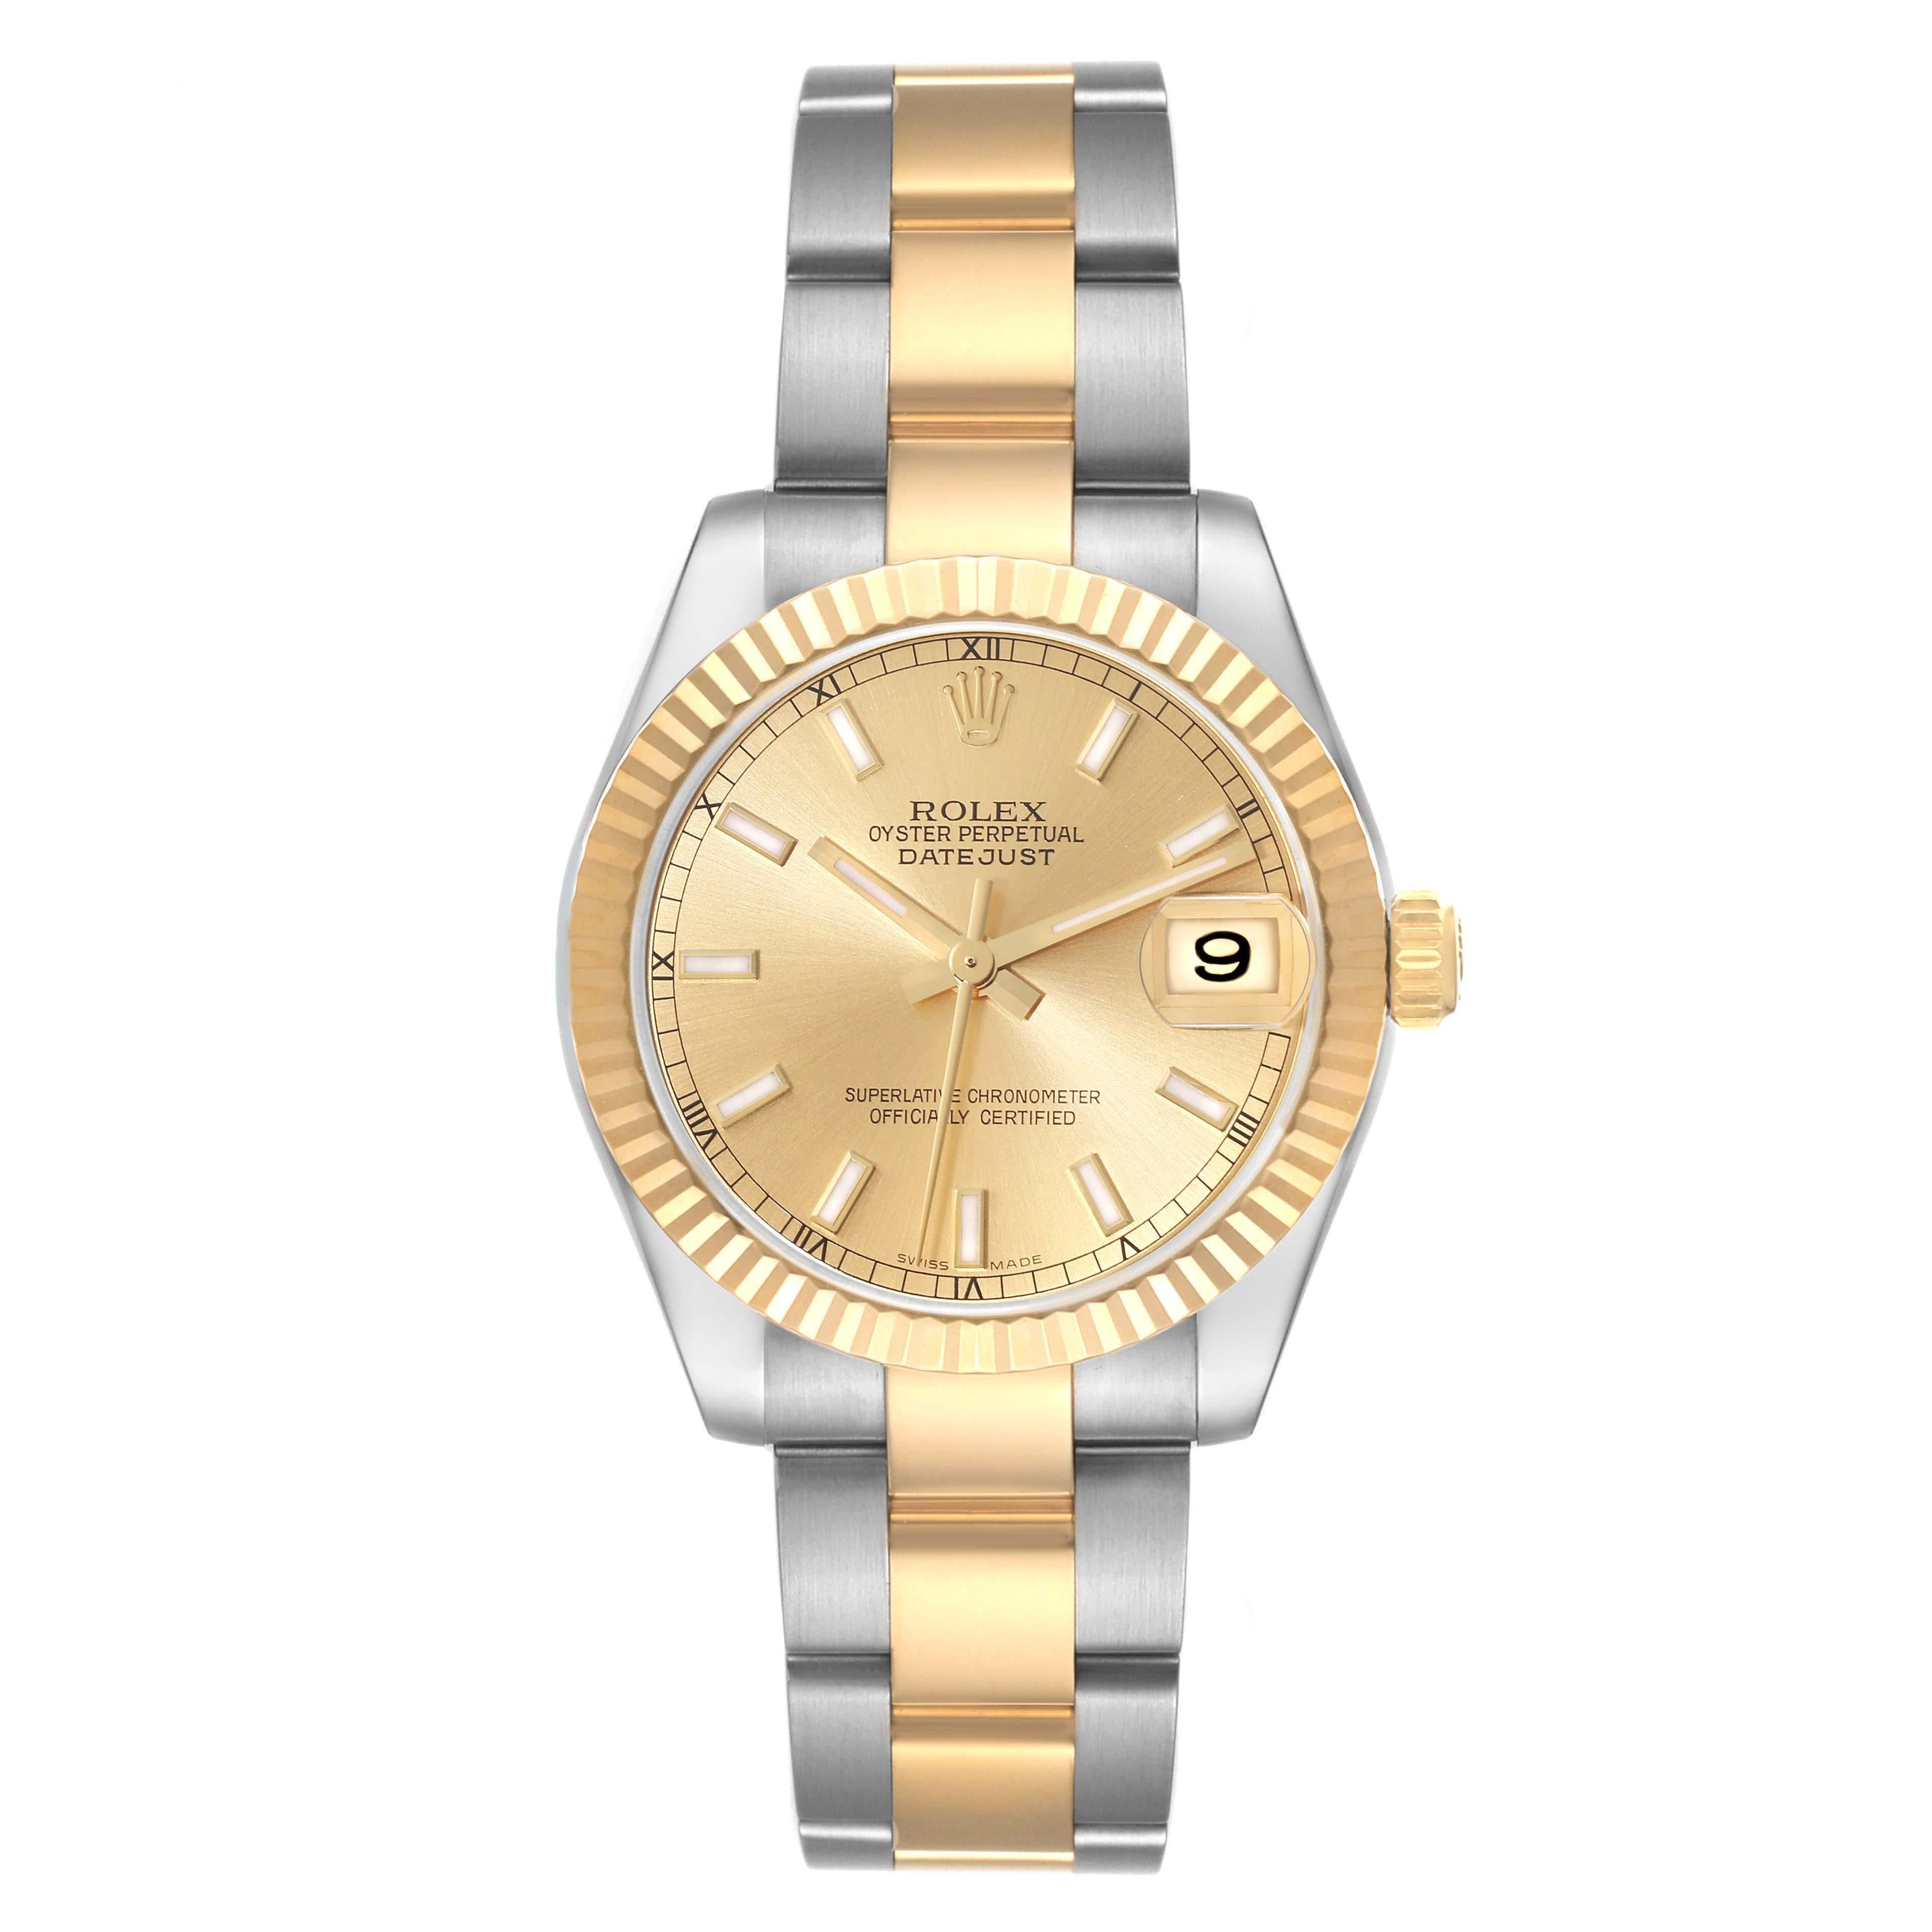 Rolex Datejust Midsize Steel Yellow Gold Ladies Watch 178273 Box Papers. Officially certified chronometer automatic self-winding movement. Stainless steel oyster case 31.0 mm in diameter. Rolex logo on 18K yellow gold crown. 18k yellow gold fluted